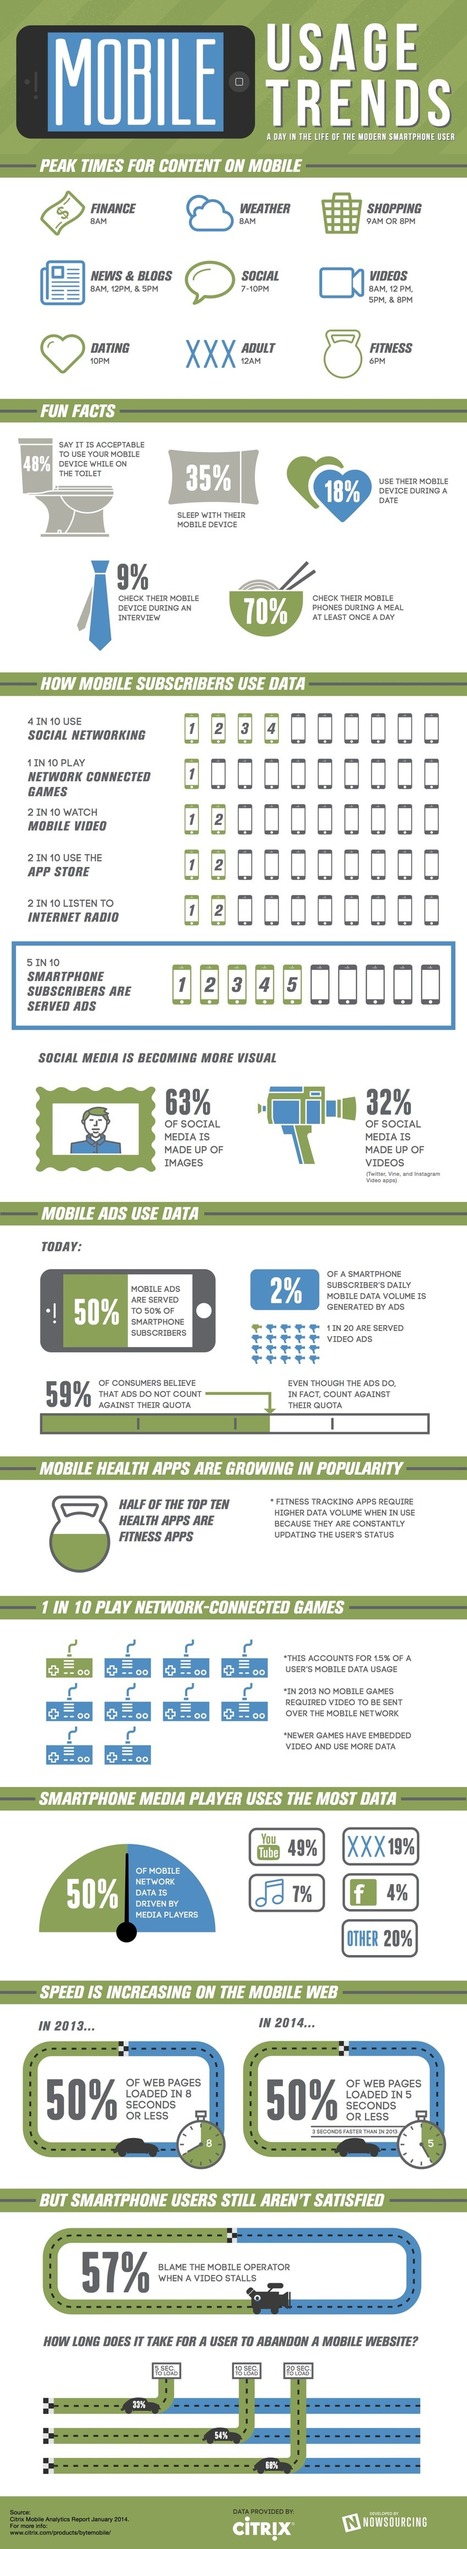 A Day in the Life of the Modern Smartphone User [Infographic] | E-Learning-Inclusivo (Mashup) | Scoop.it